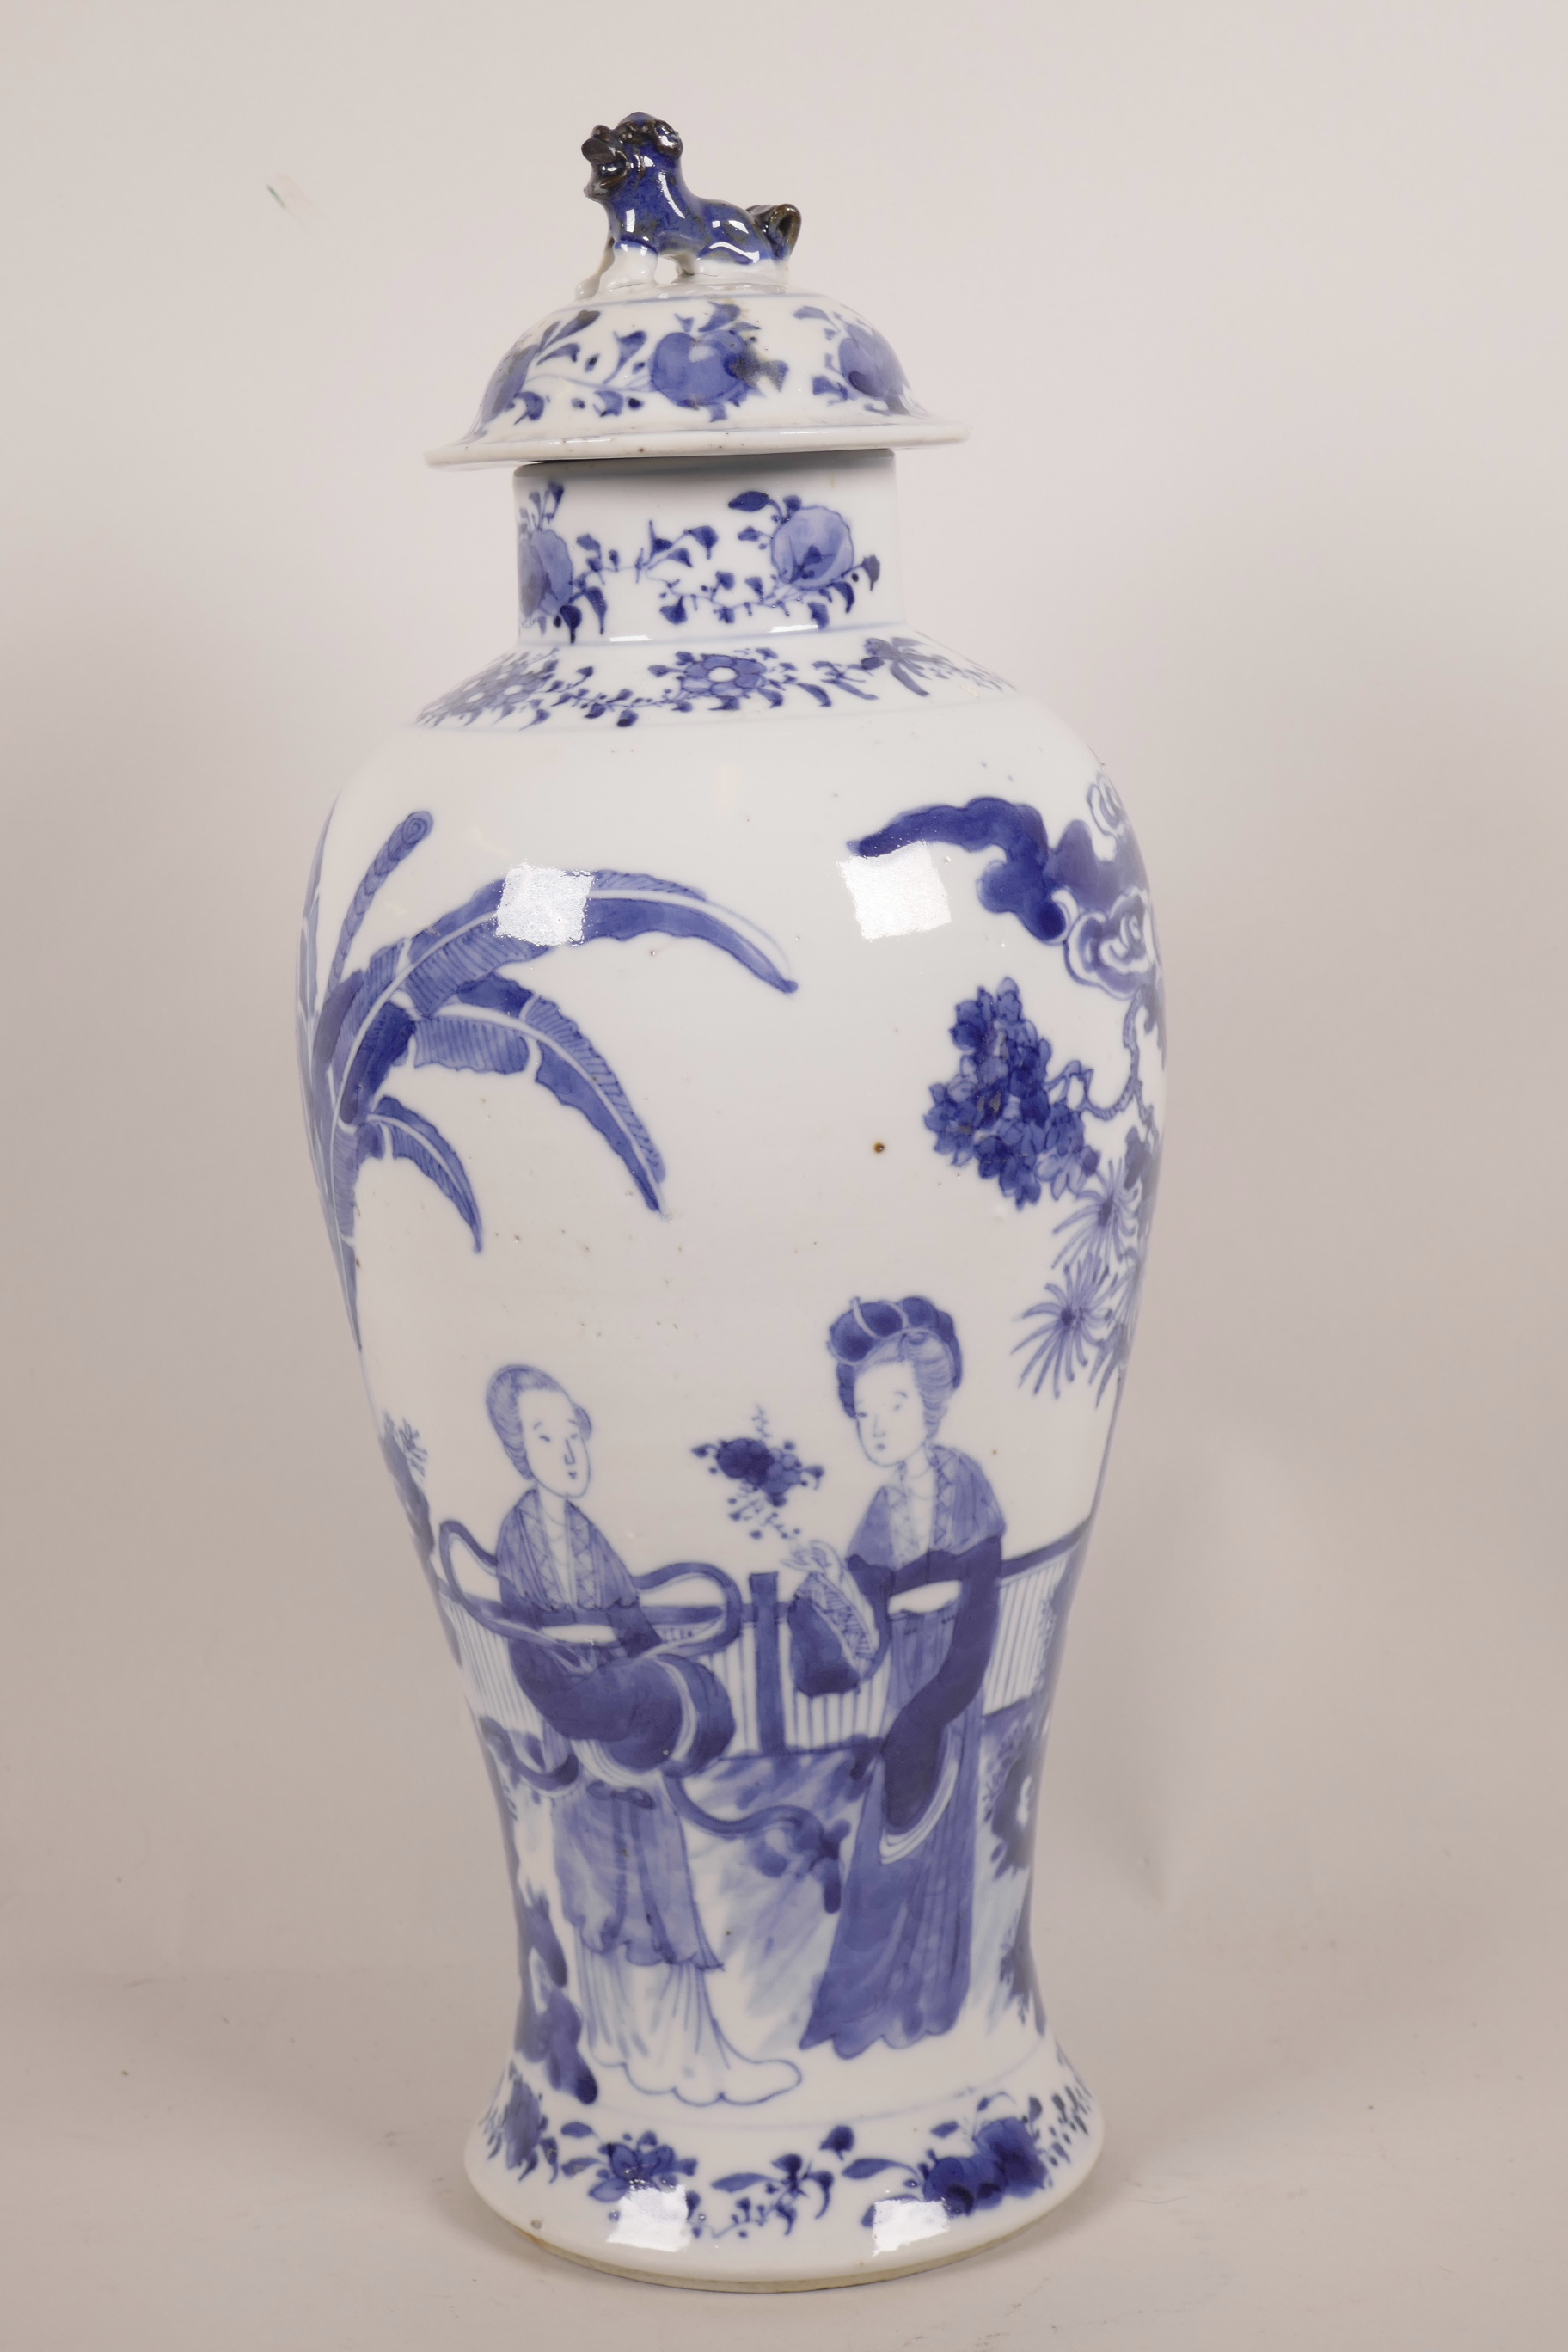 A C19th Chinese blue and white porcelain baluster vase and cover decorated with female figures in